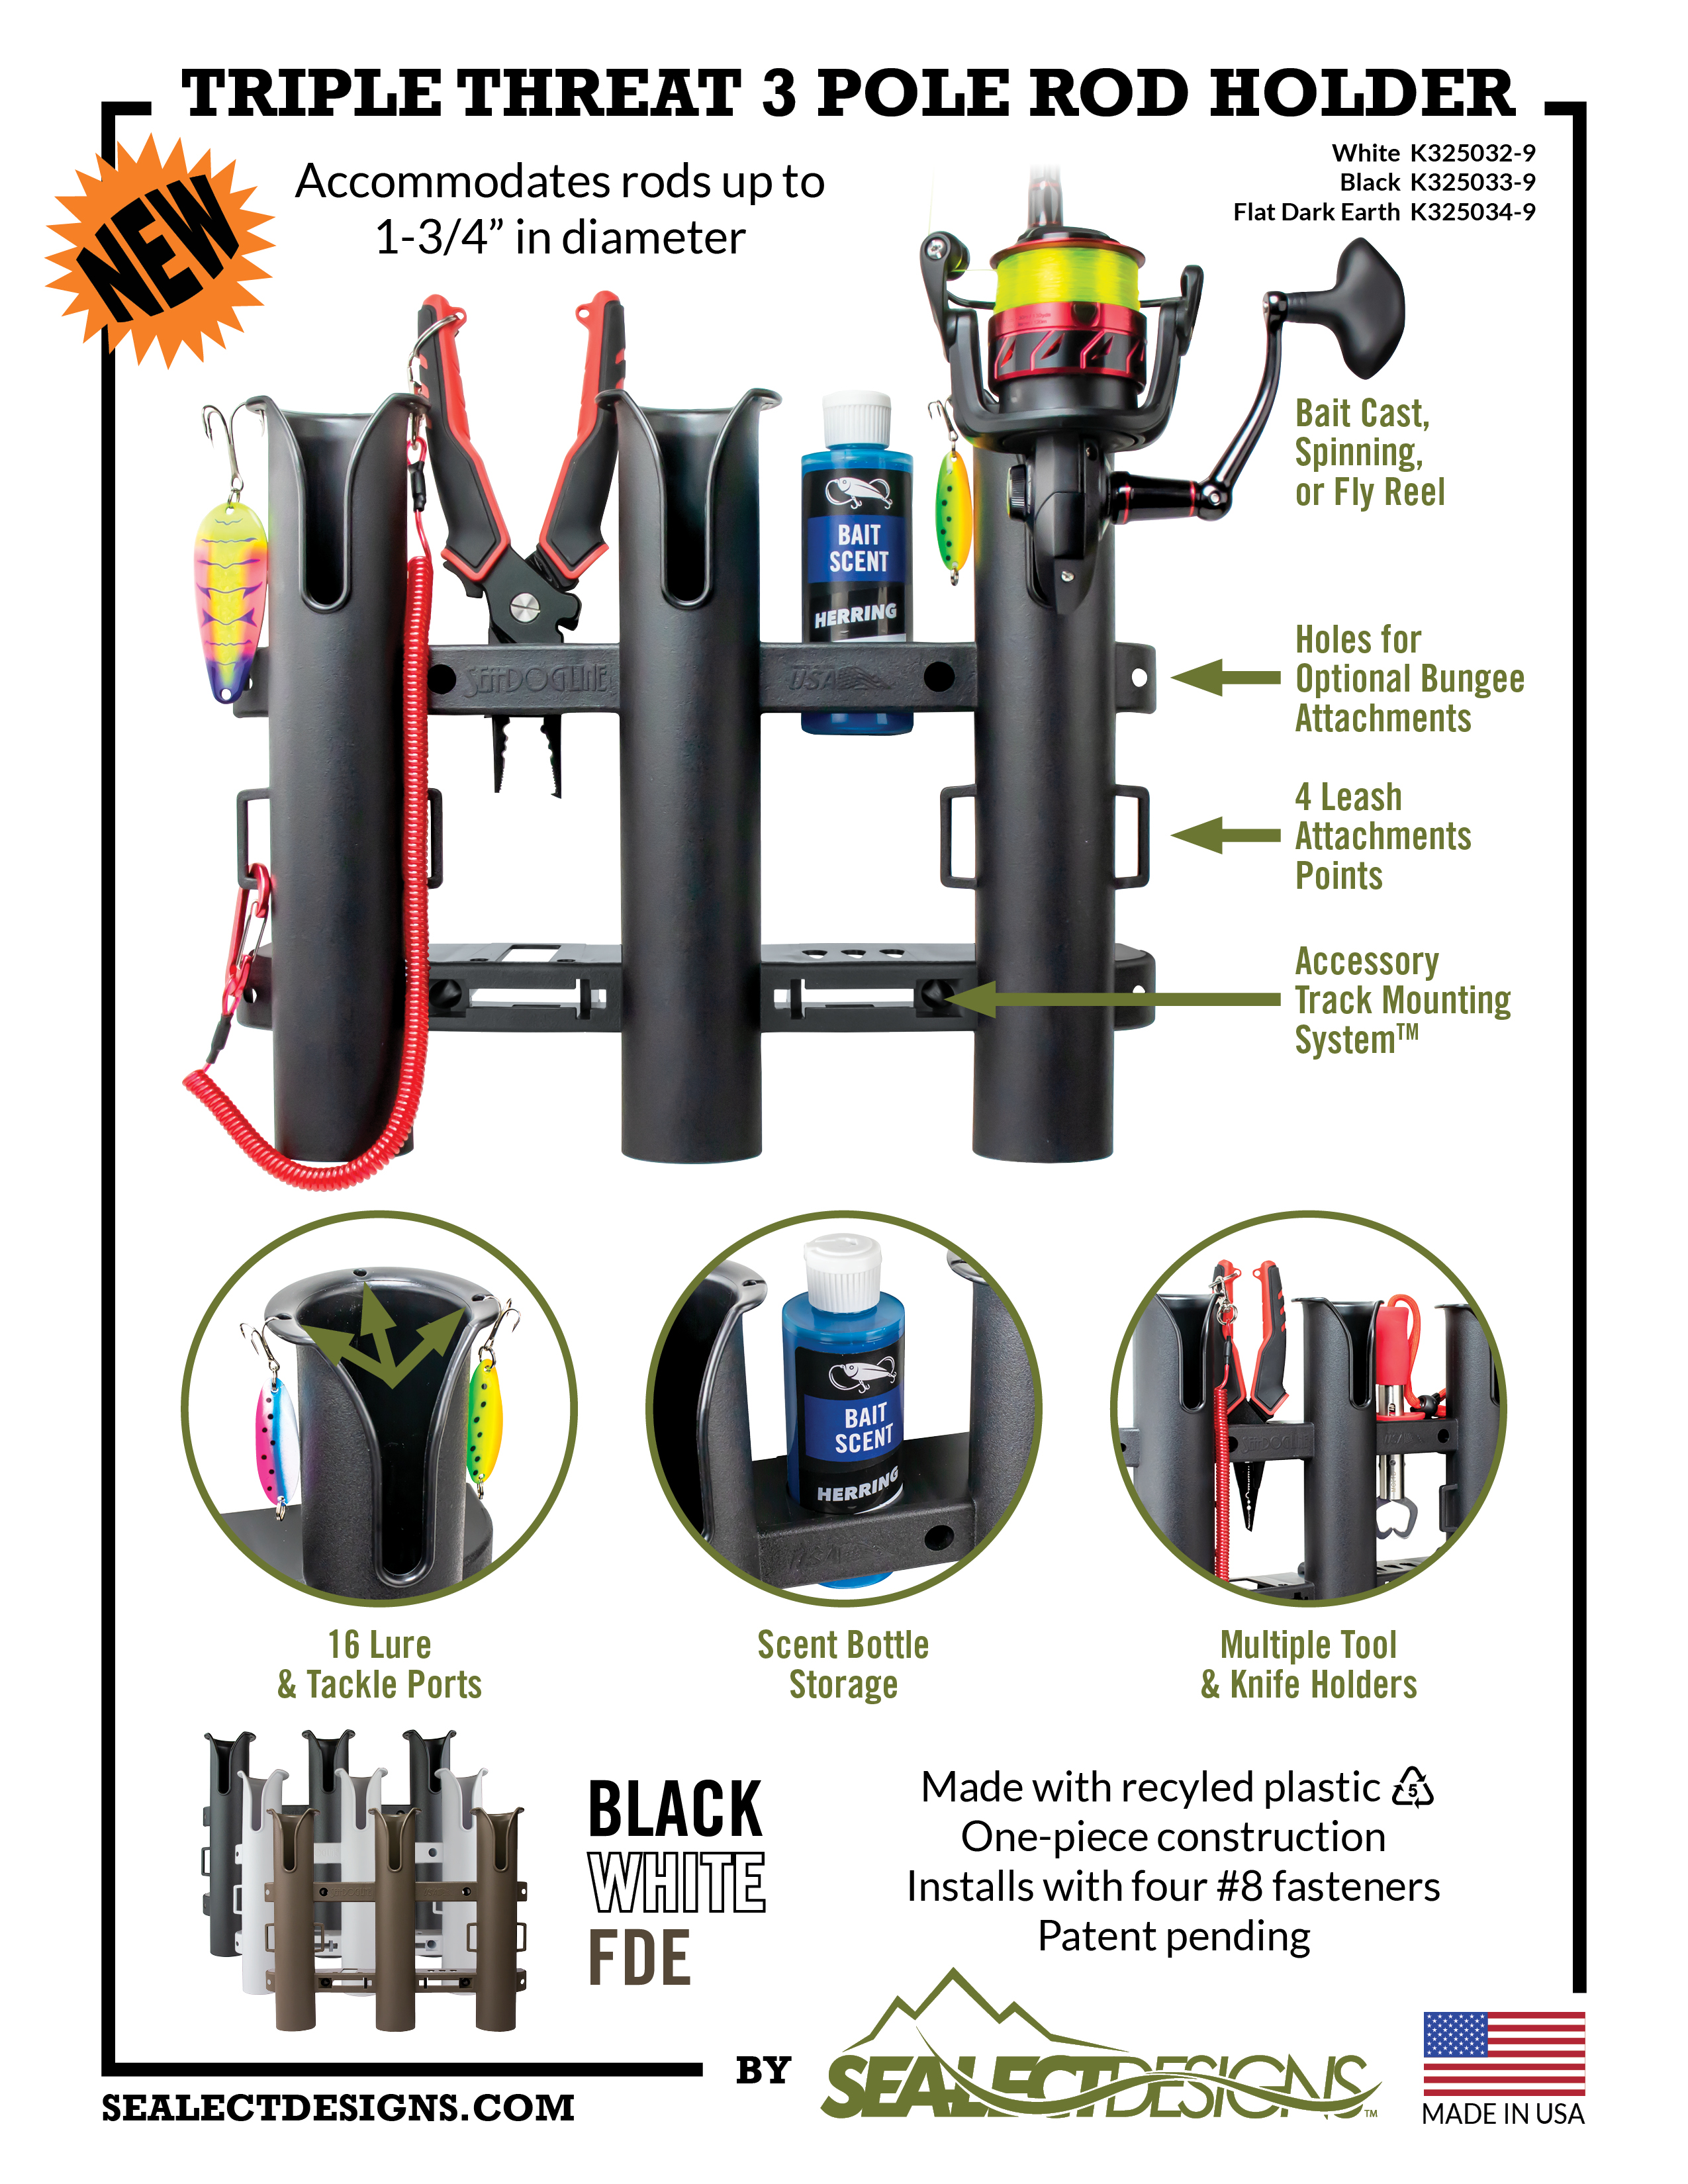 Lifetime Blog: How to Use the Triple Threat Rod Holder